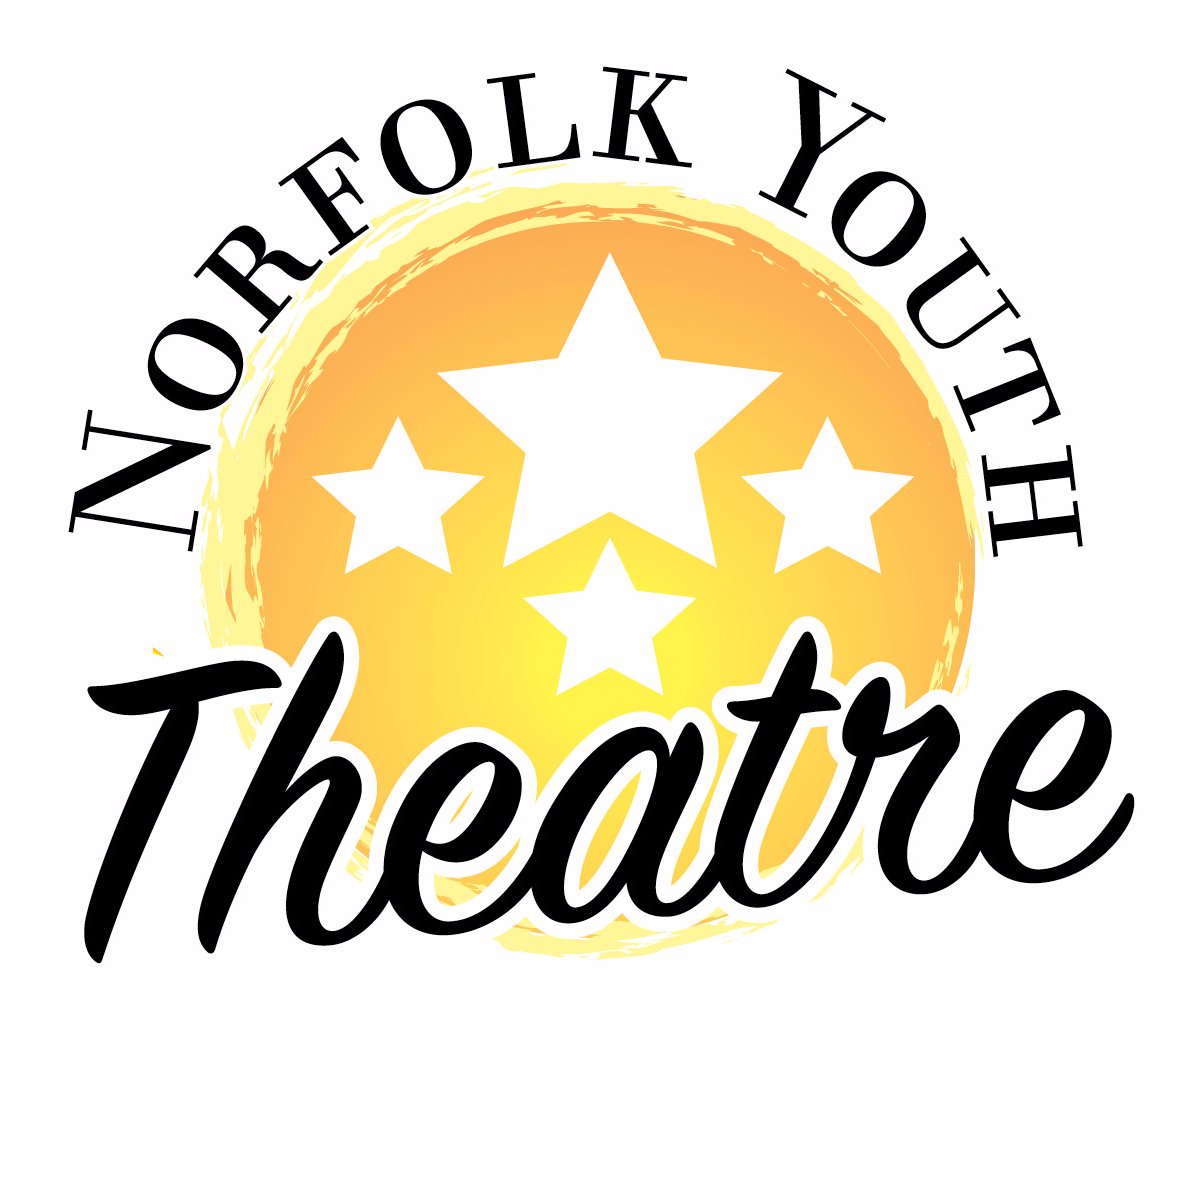 Nfk Youth Theatre